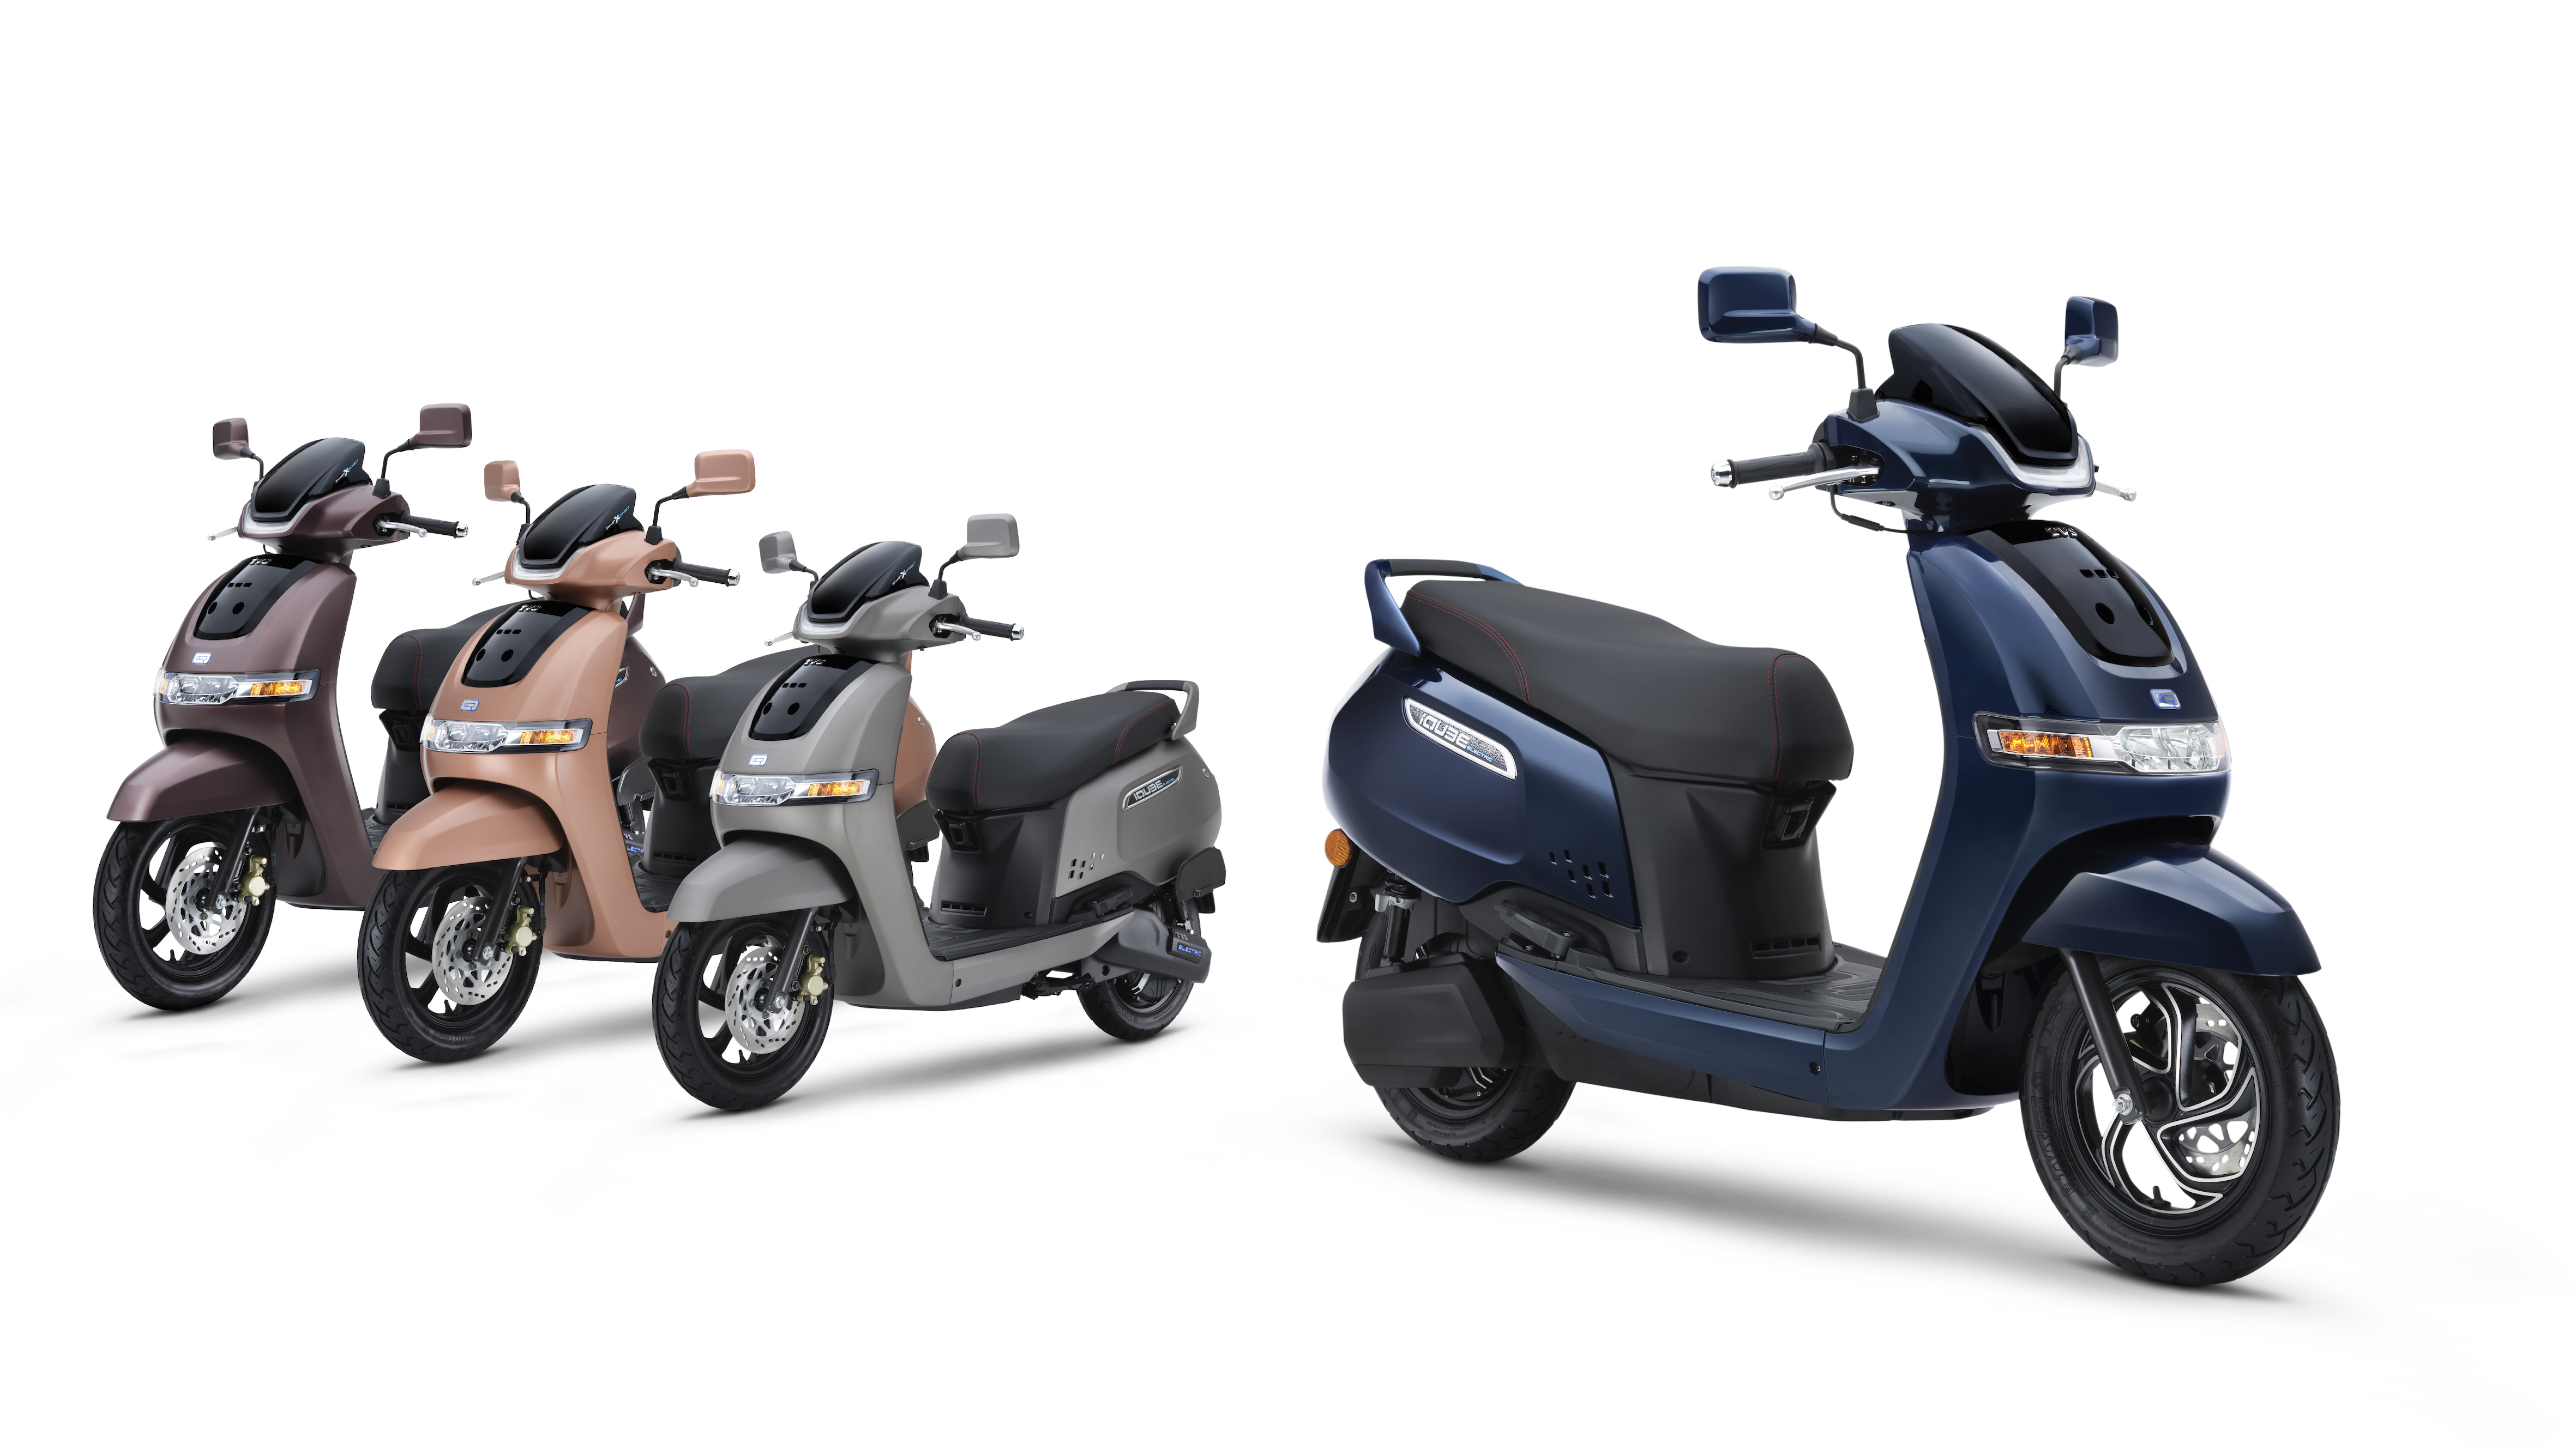 TVS Motor Company launches the new TVS iQube Electric Scooter with a host of exciting features